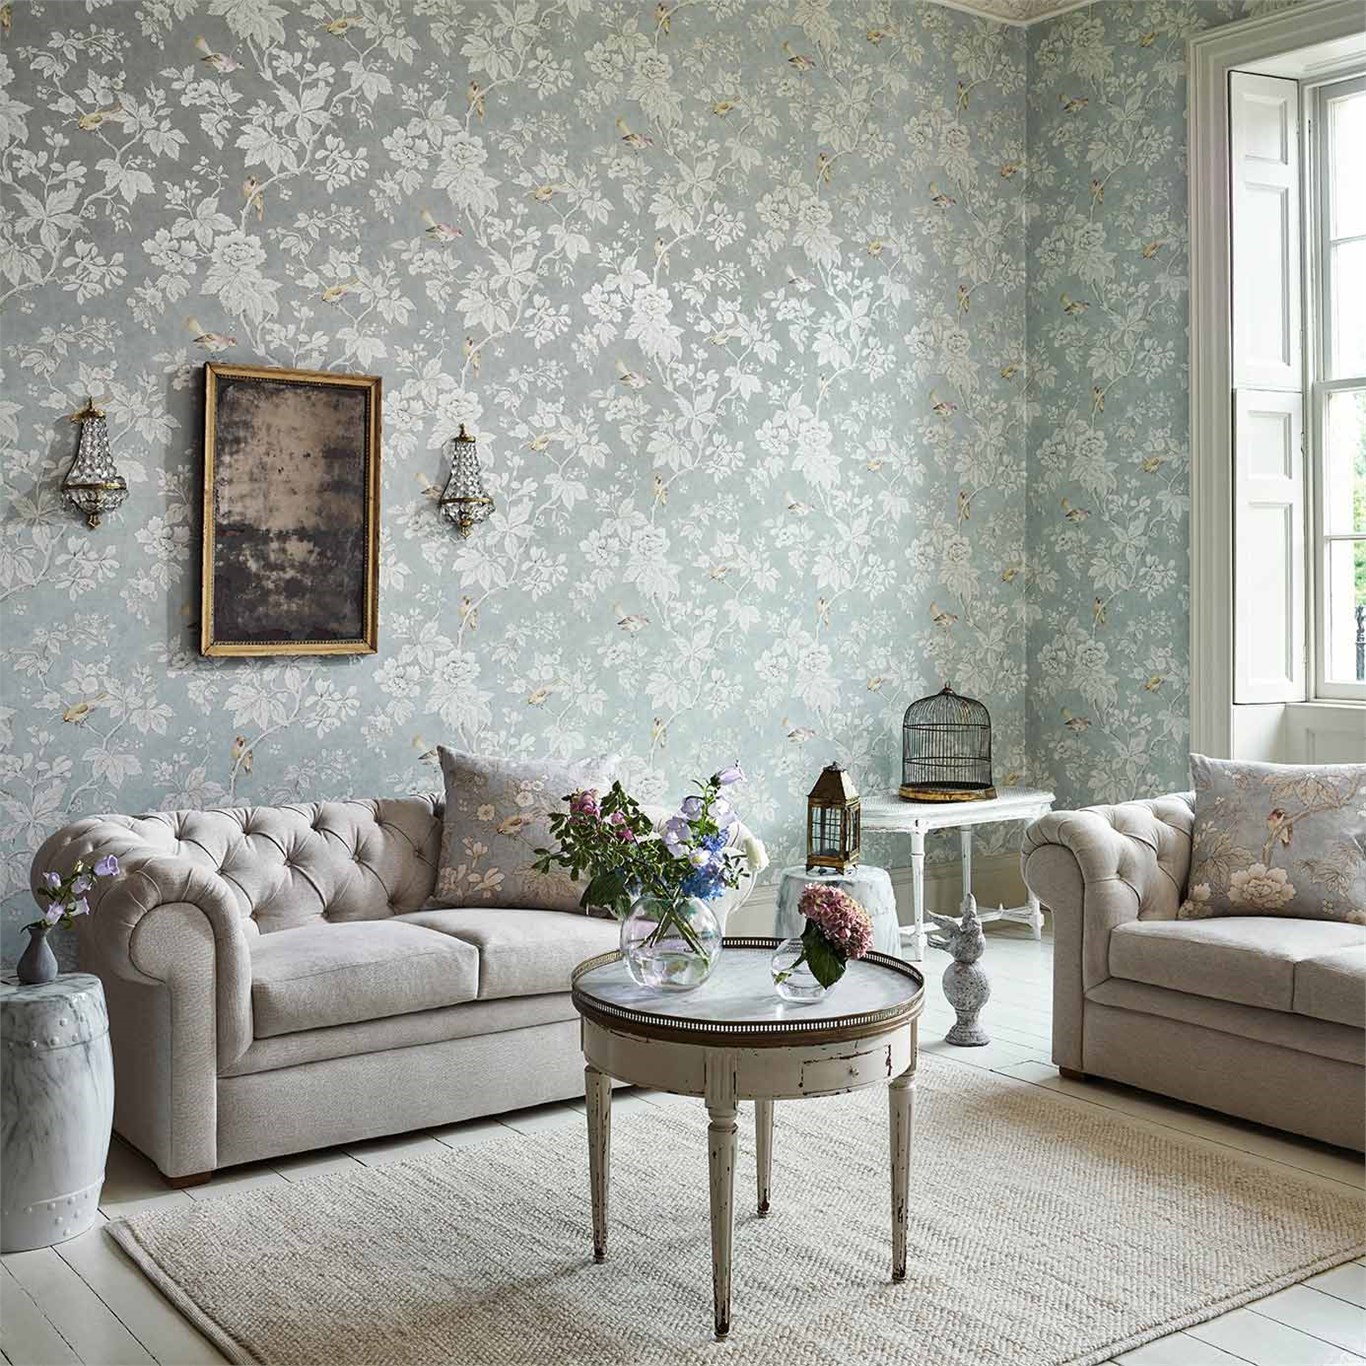 Chiswick Grove, A Wallpaper By Sanderson, Part Of The - Sanderson Wallpaper Chiswick Grove - HD Wallpaper 